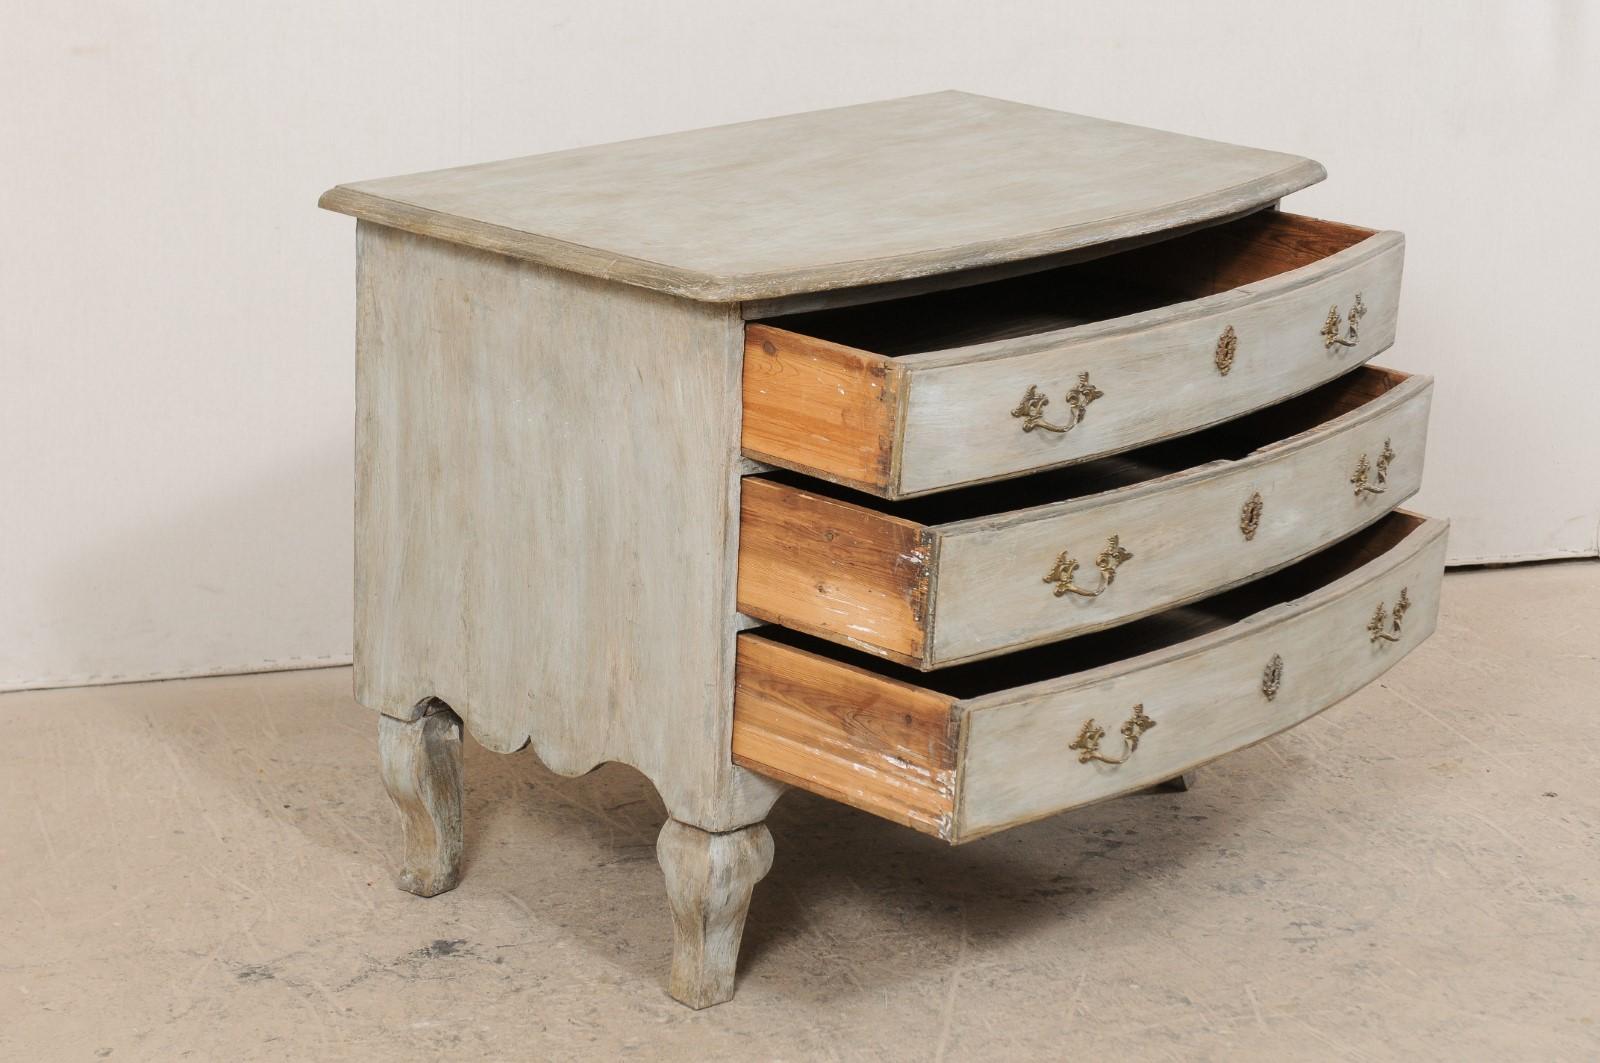 Swedish Period Rococo Bow-Front Painted Wood Chest, Mid-18th Century 5